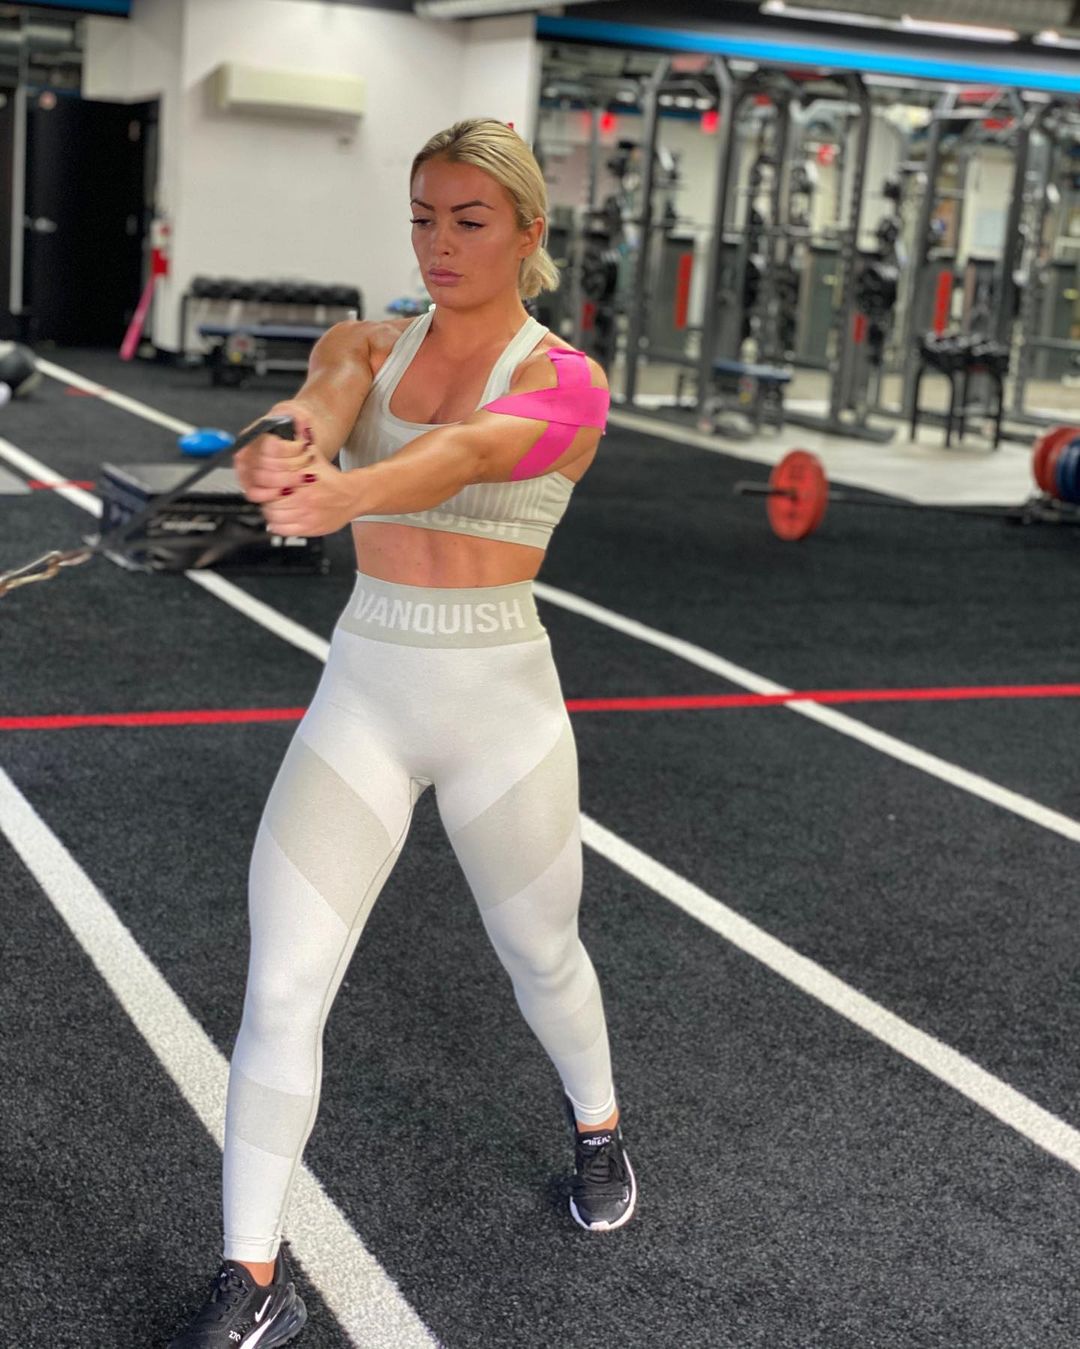 Wwe Stars Mandy Rose And Sonya Deville Share A Behind The Scenes Look ...